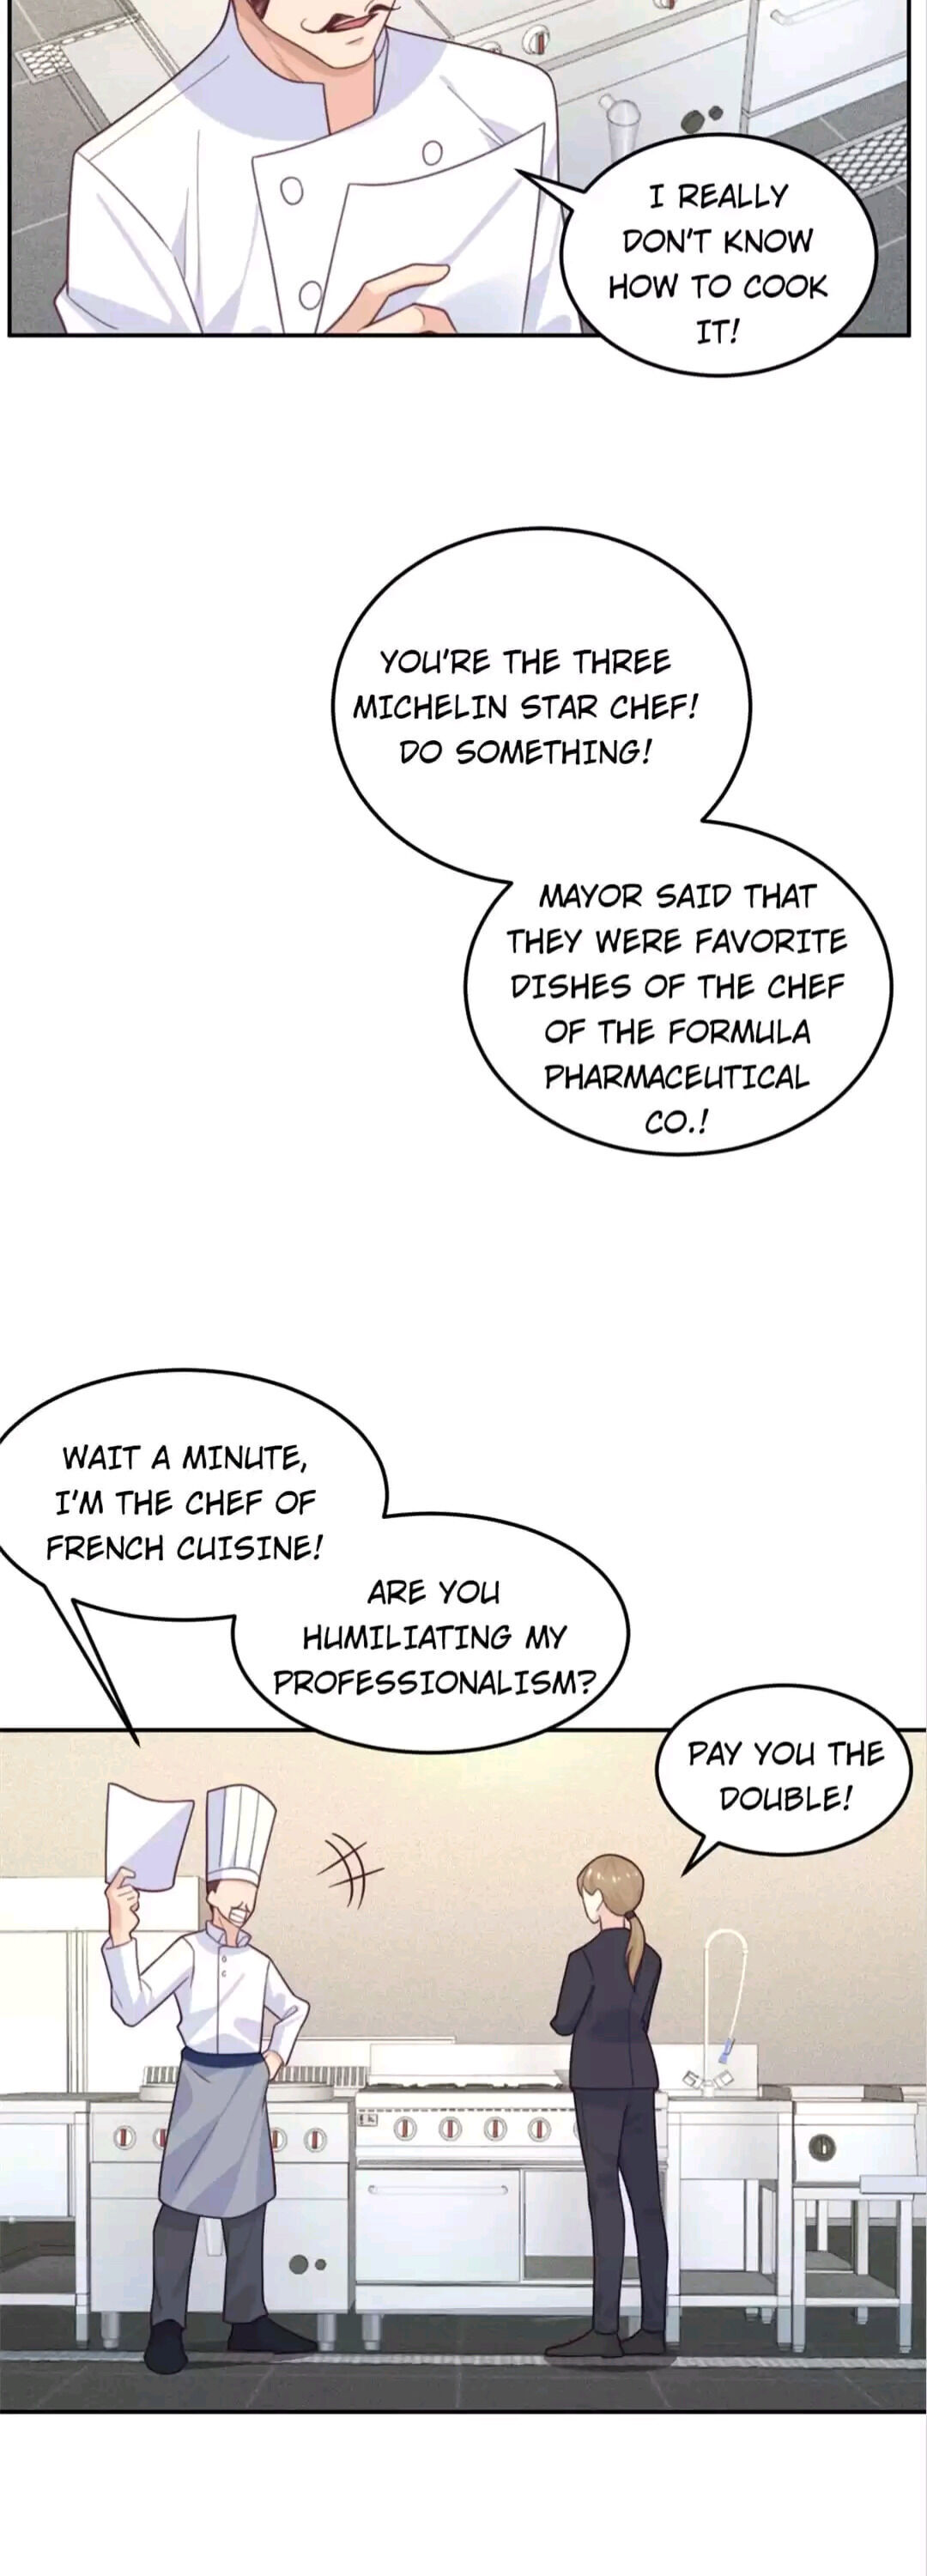 Presenting My Sadistic Manager With Stupidity - Page 2